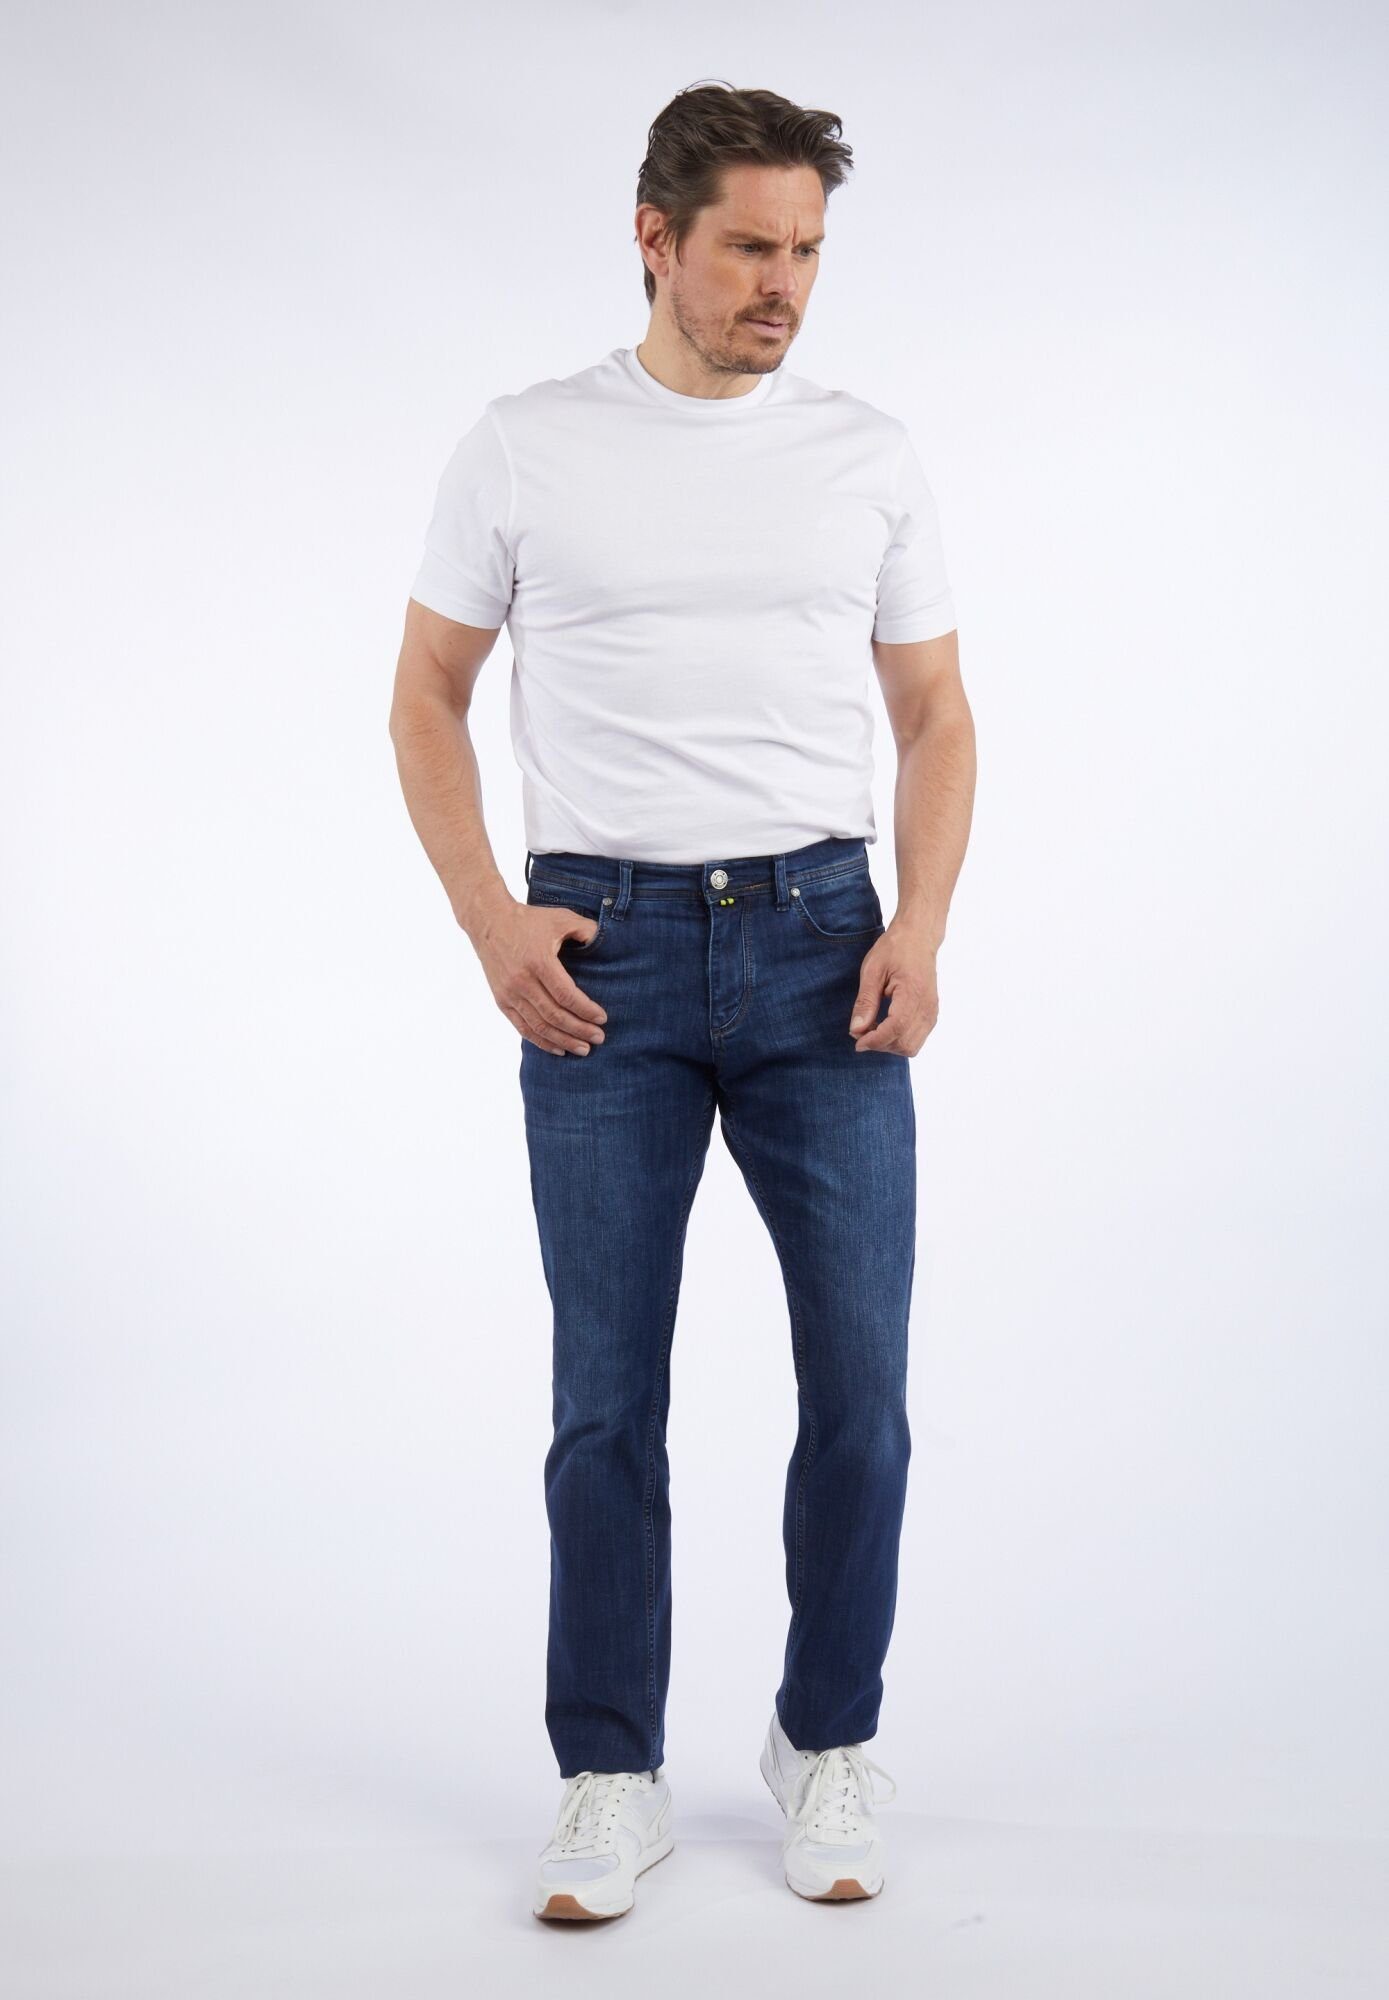 HECHTER PARIS Straight-Jeans im Stone-Washed-Look navy